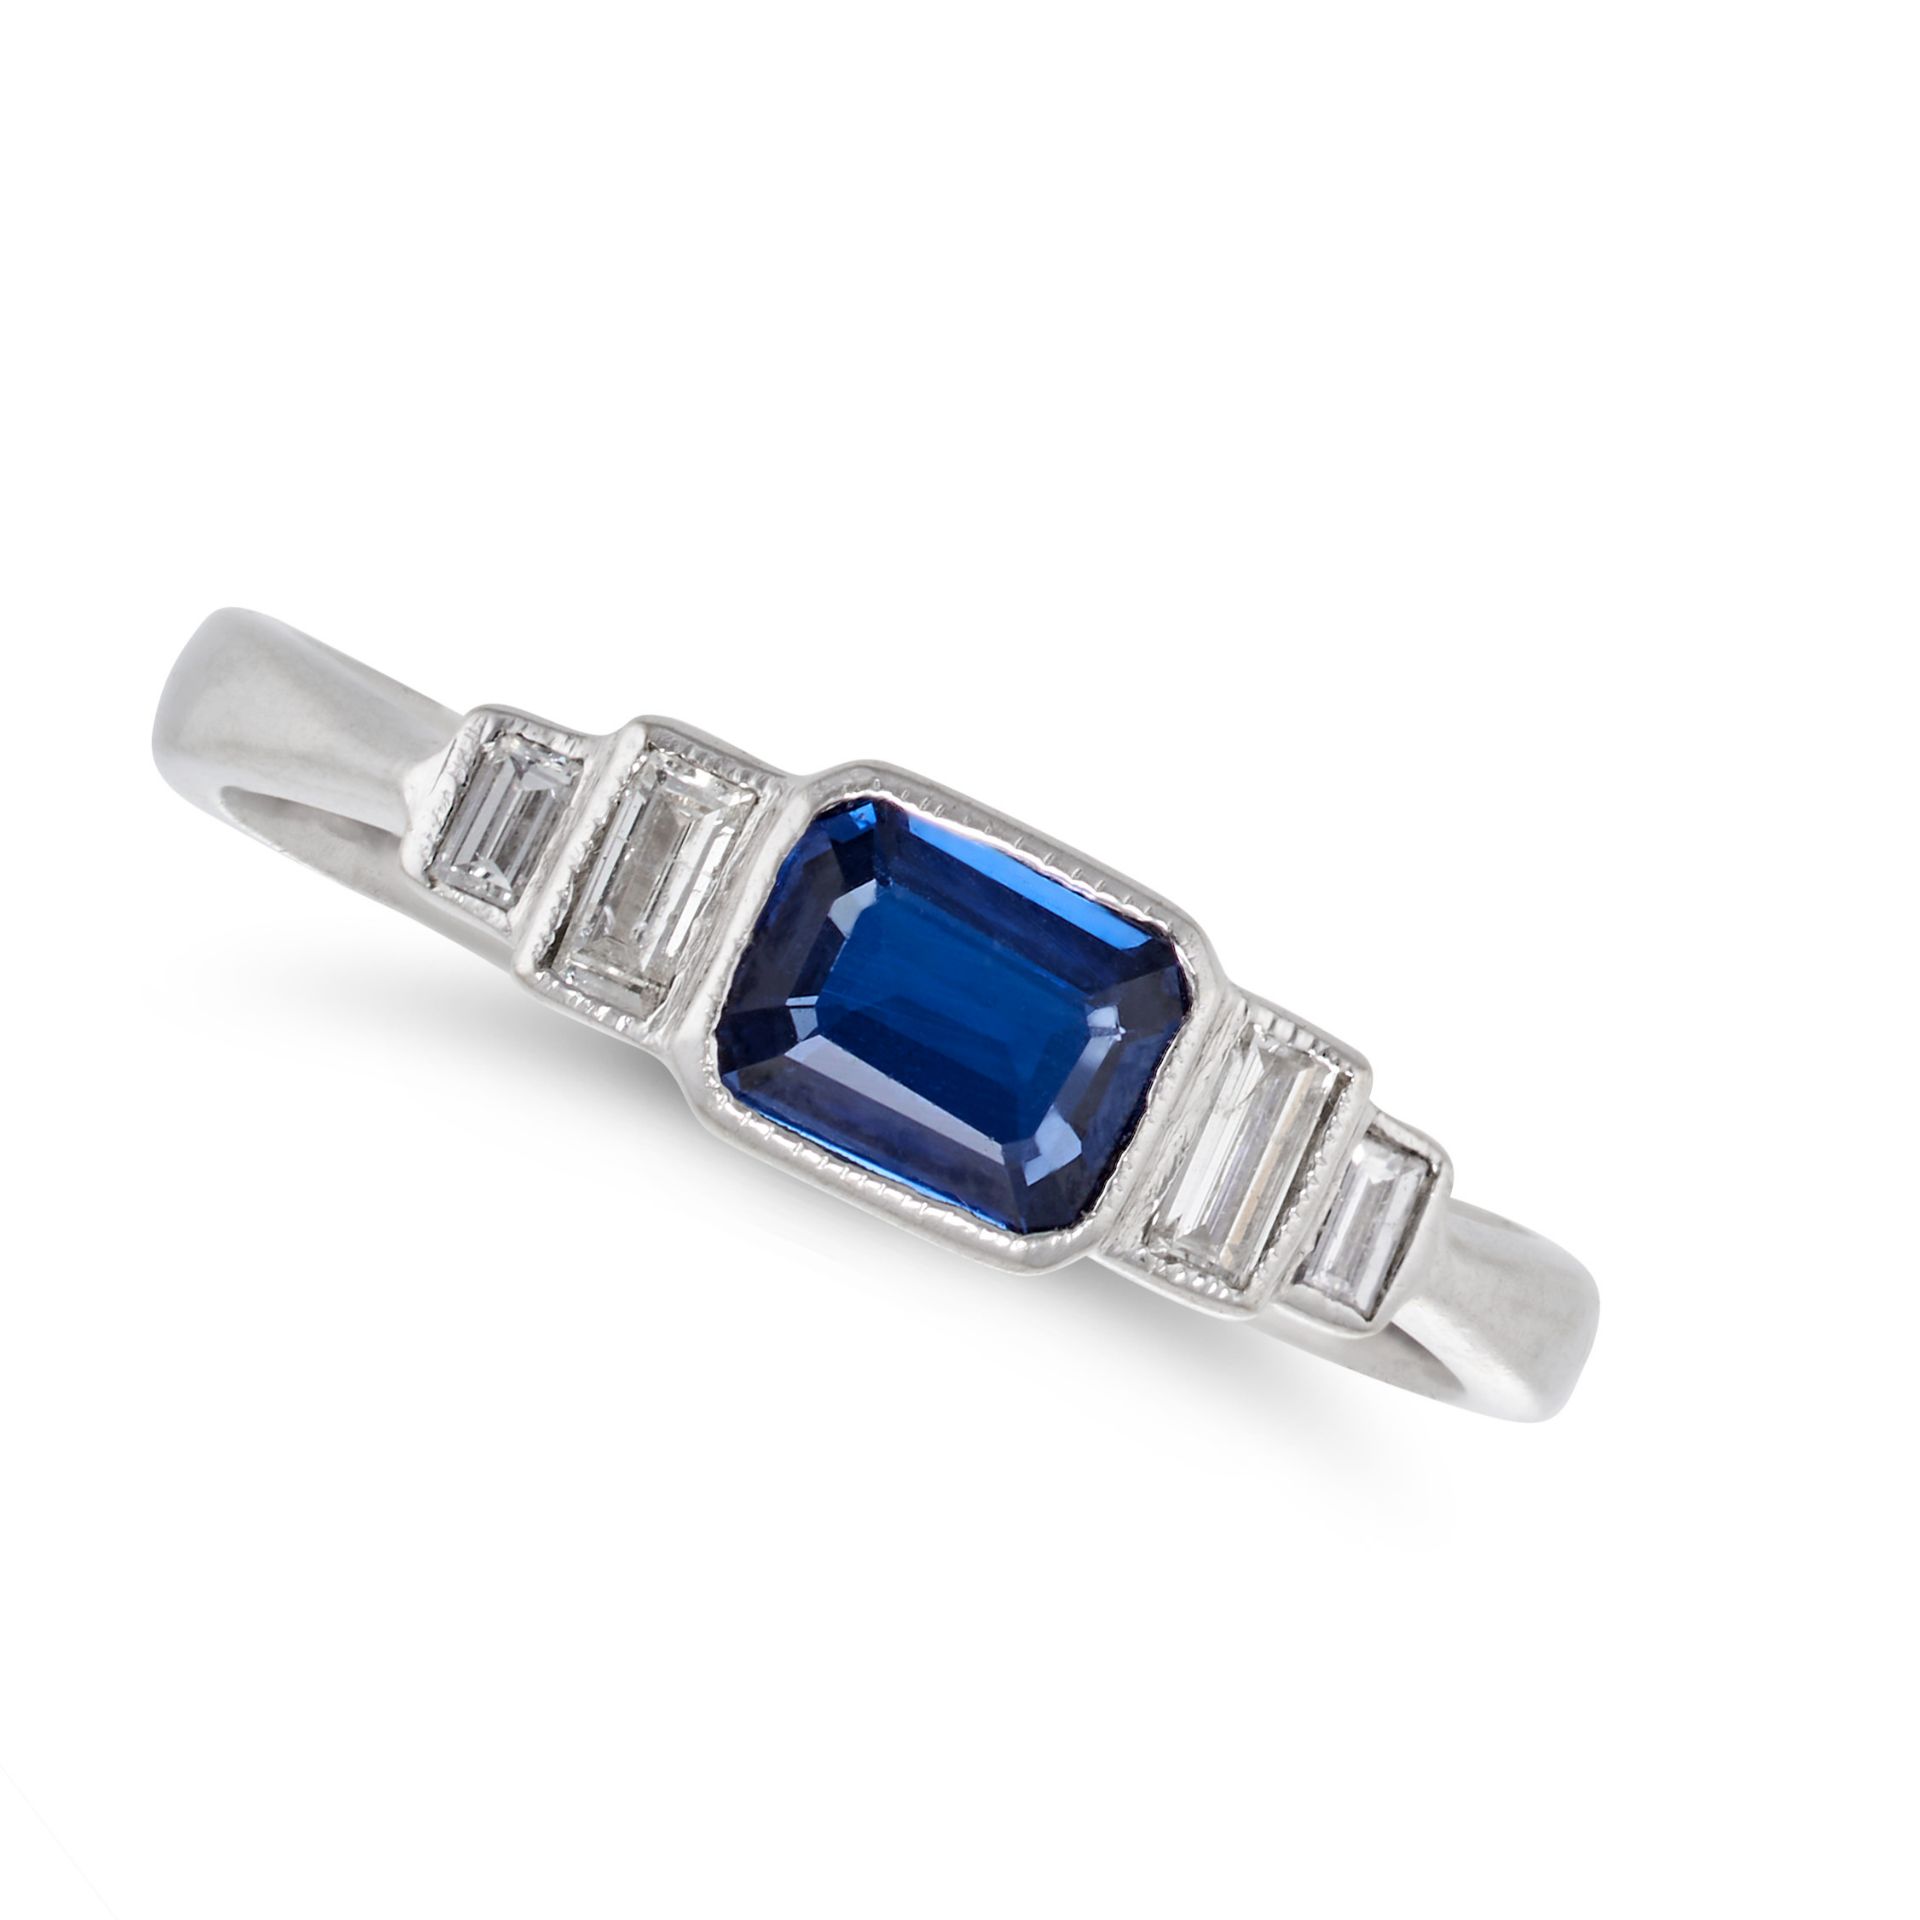 NO RESERVE - A SAPPHIRE AND DIAMOND RING in 18ct white gold, set with an octagonal step cut sapph...